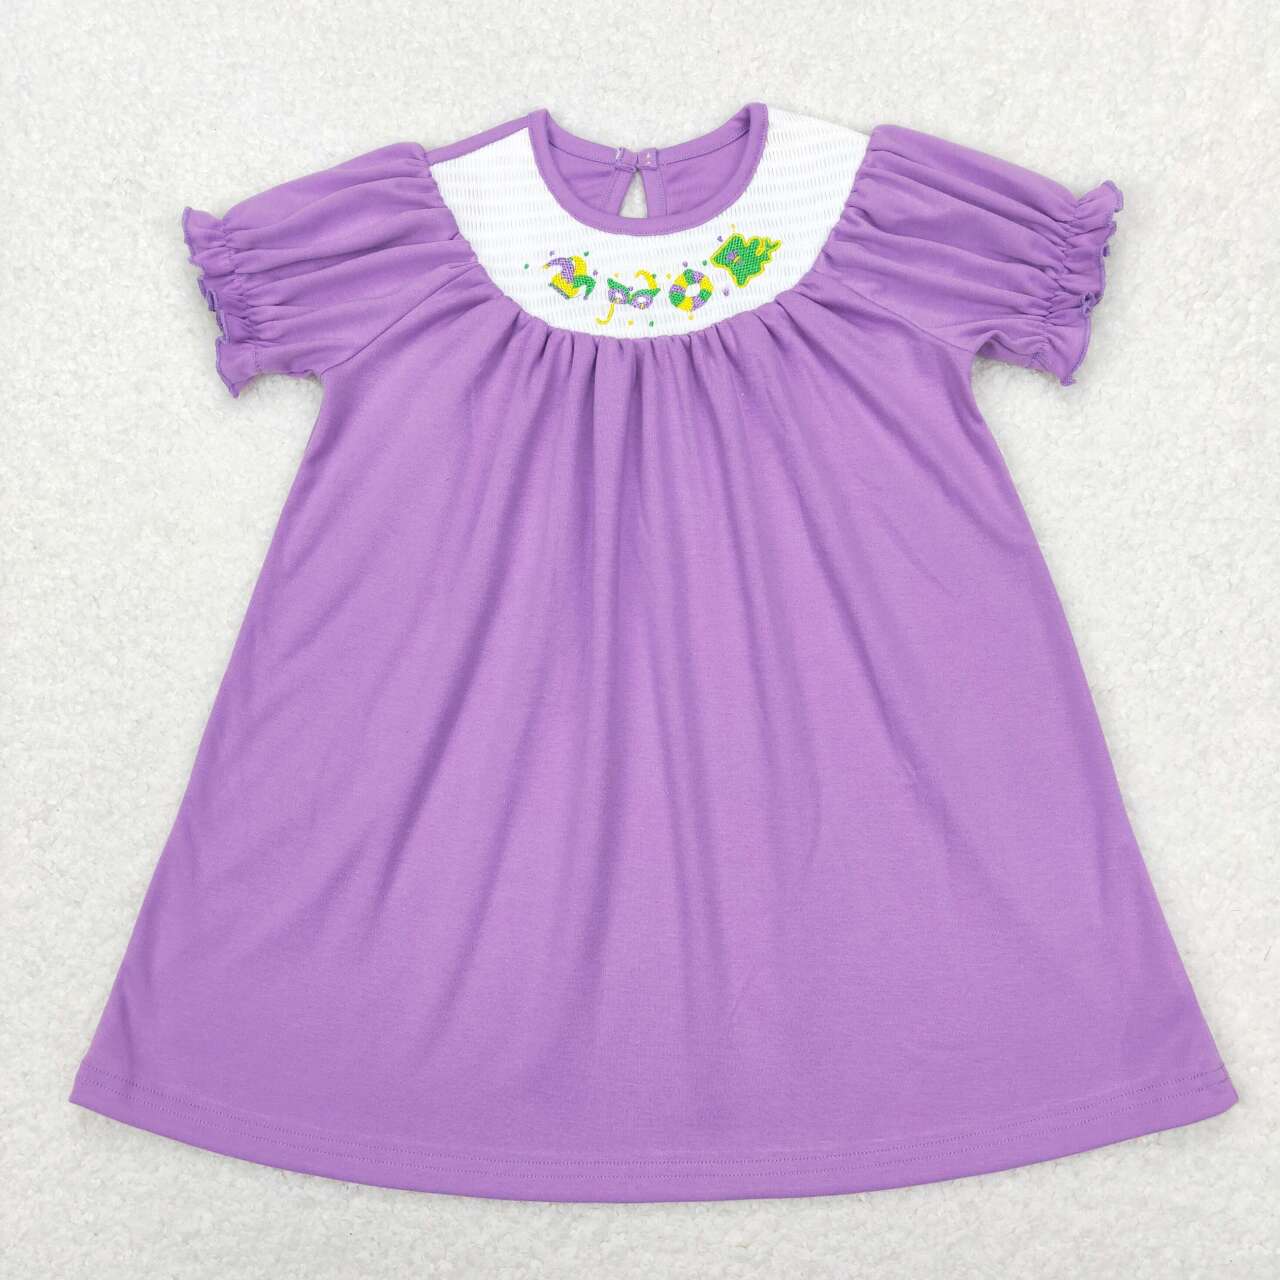 GSD0502 smocked embroidered carnival mask purple and white plaid short-sleeved dress